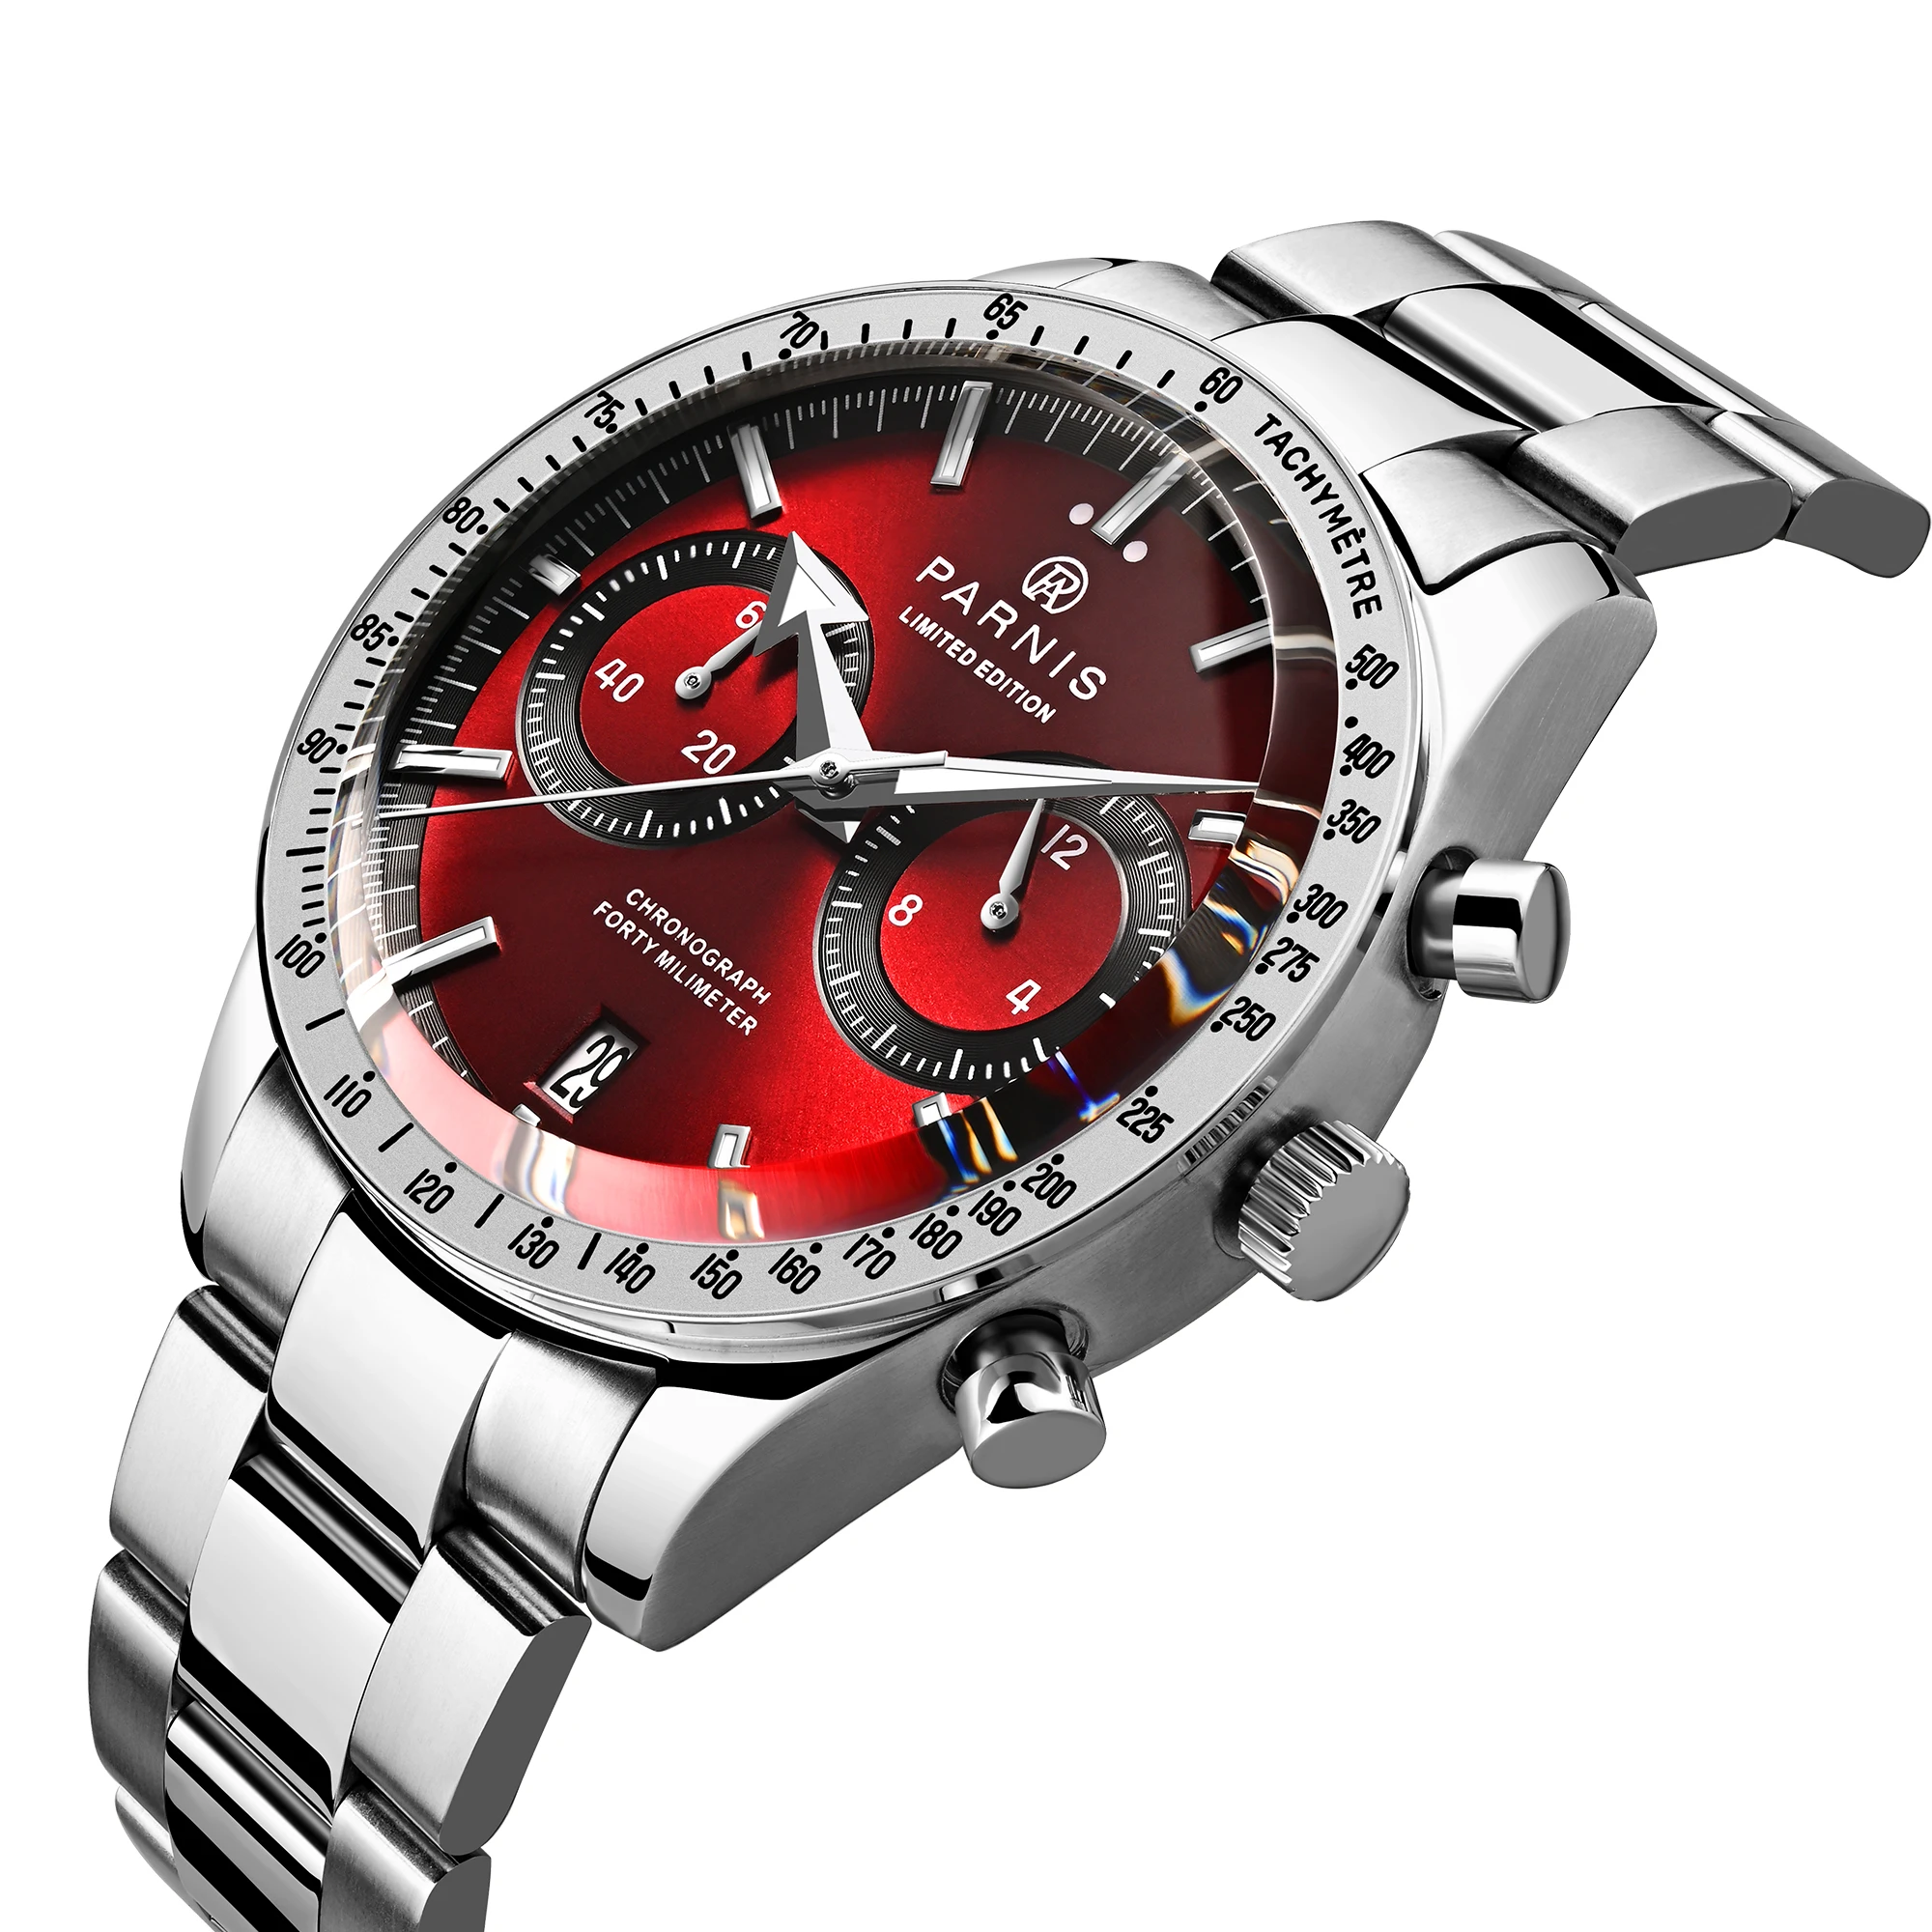 

New Arrival Parnis 40mm Red Dial Quartz Chronograph Men's Watch Calendar Stainless Steel Waterproof Luxury Watches reloj hombre